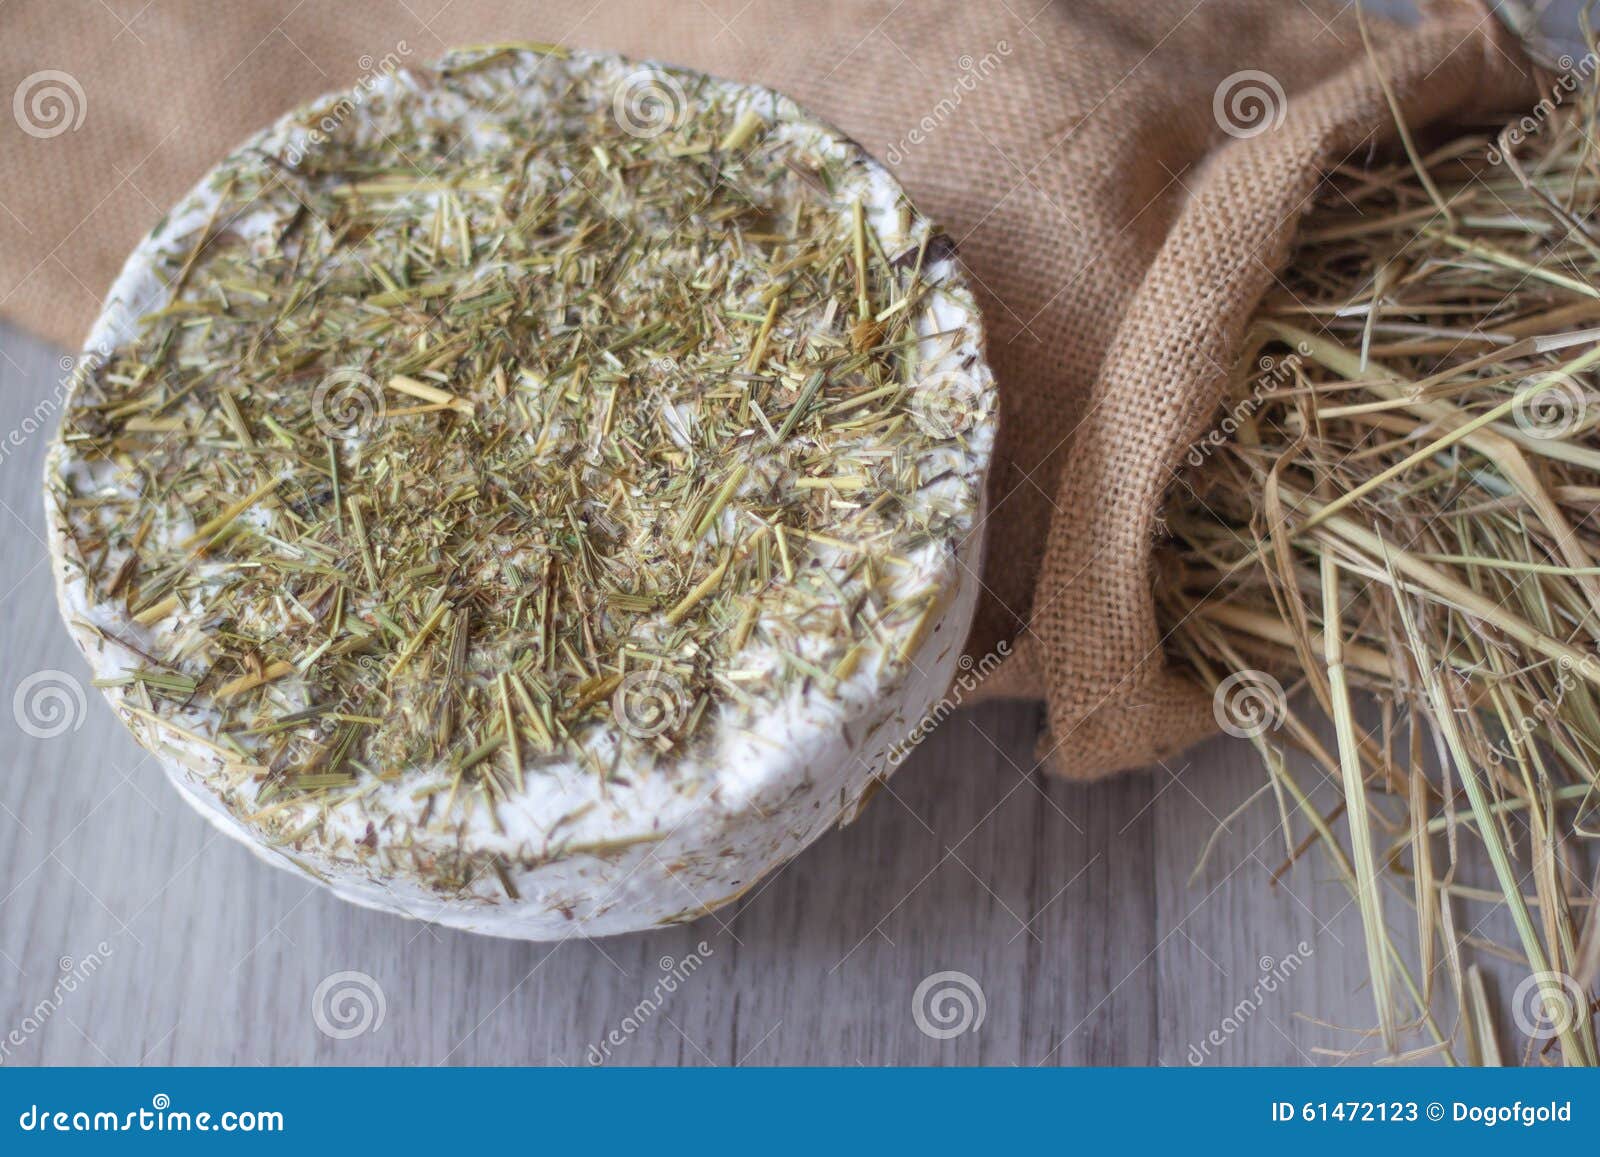 mountain pasture cheese with hay